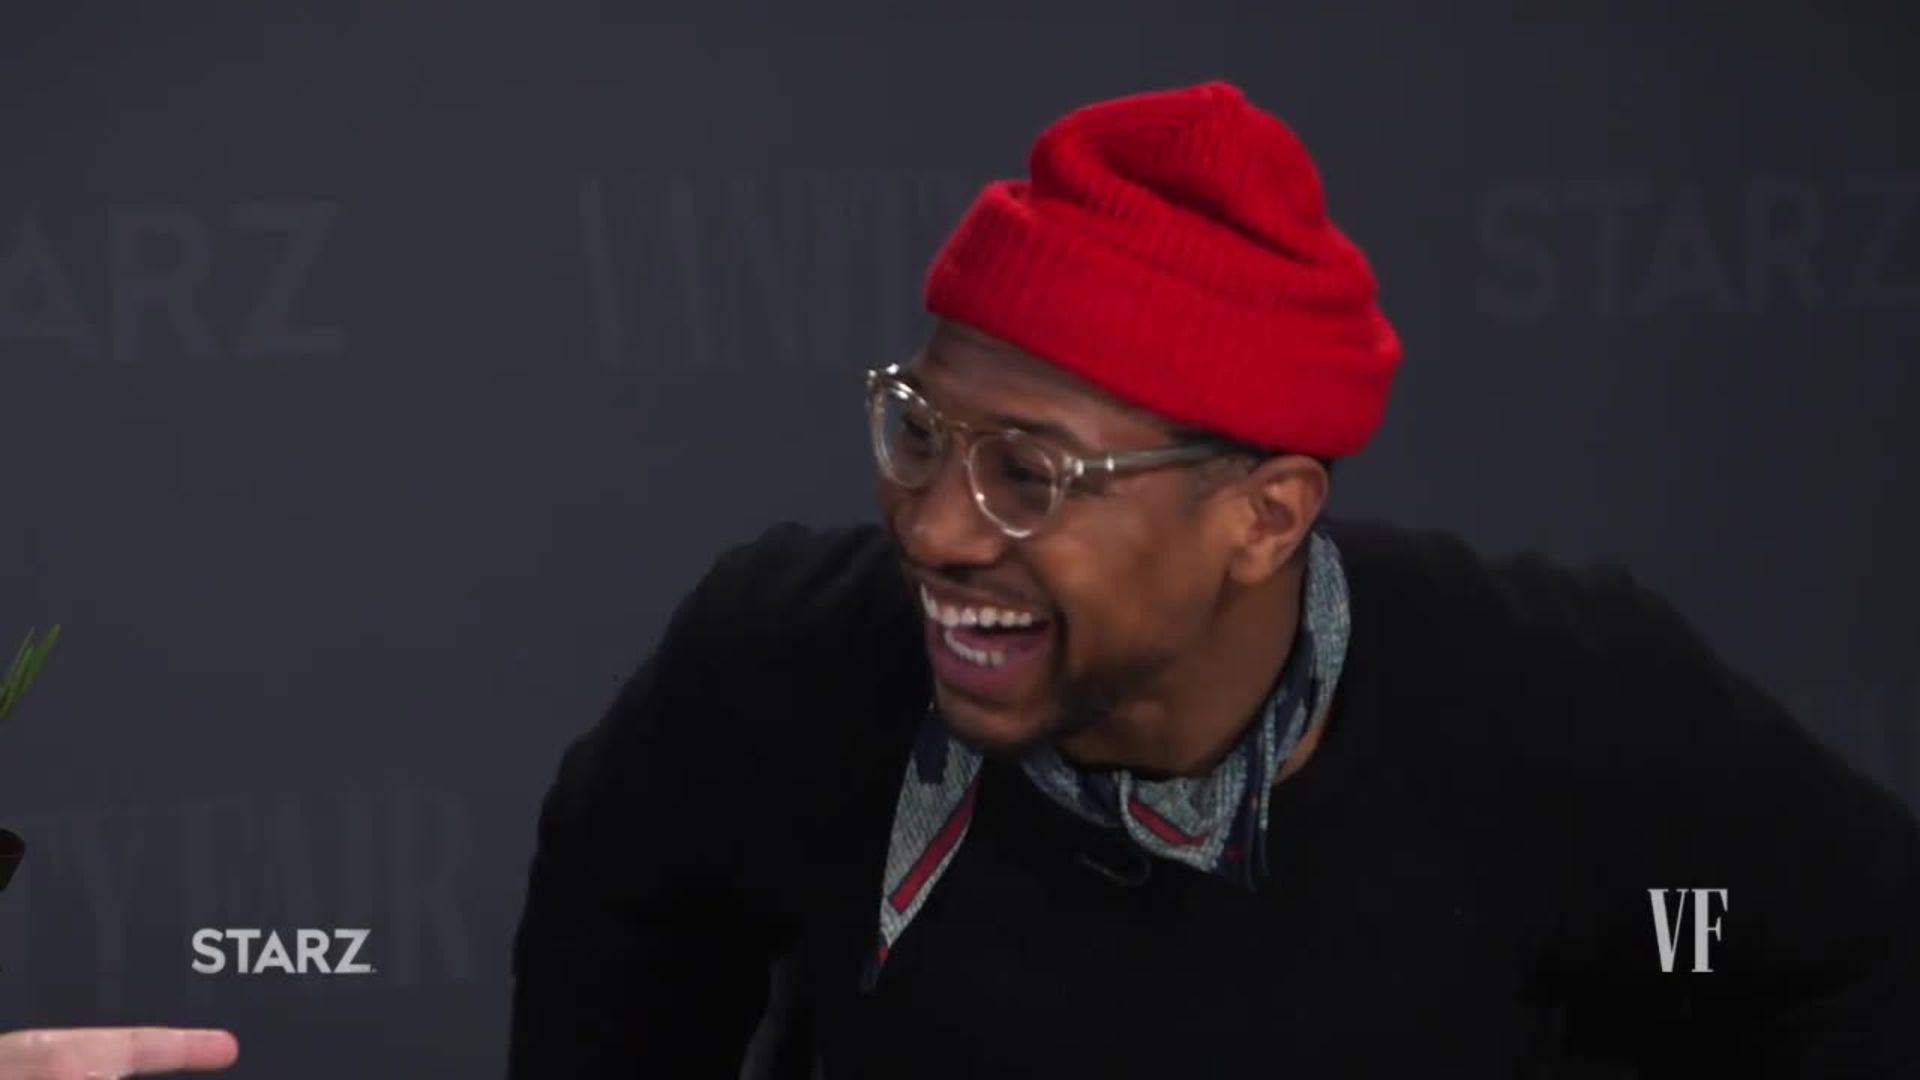 His style is on trend”: Jonathan Majors' Iconic Photoshoot was Inspired by  This One Piece Character as Stylist Admitted Anime is His Biggest  Inspiration for Fashion - FandomWire